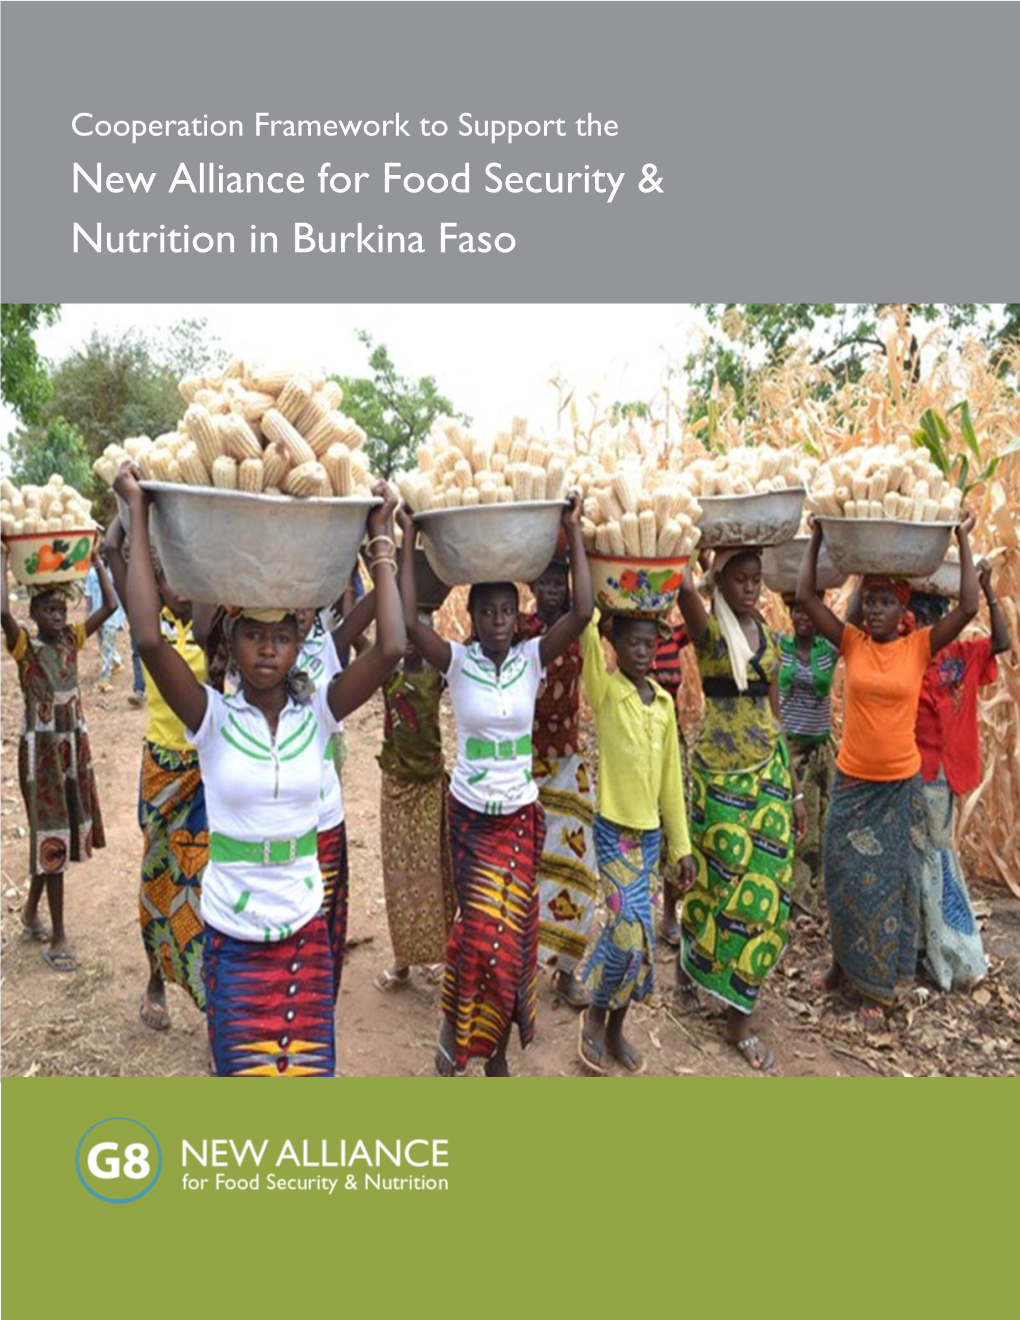 New Alliance for Food Security & Nutrition in Burkina Faso